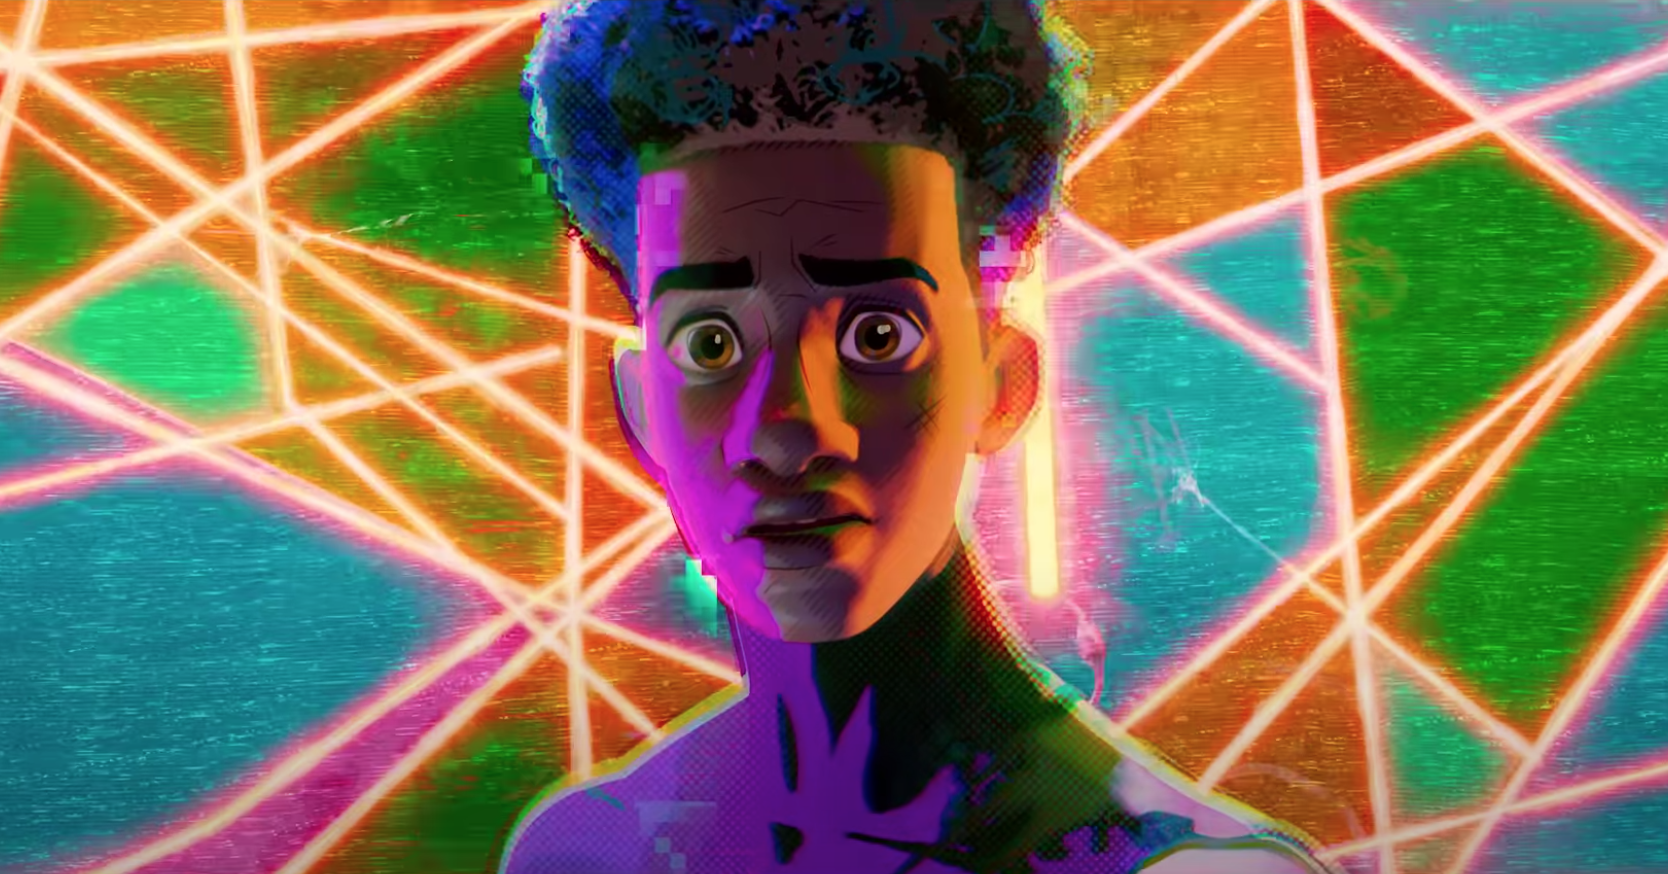 Spider-Man: Across the Spider-Verse' drops 1st trailer: Watch here